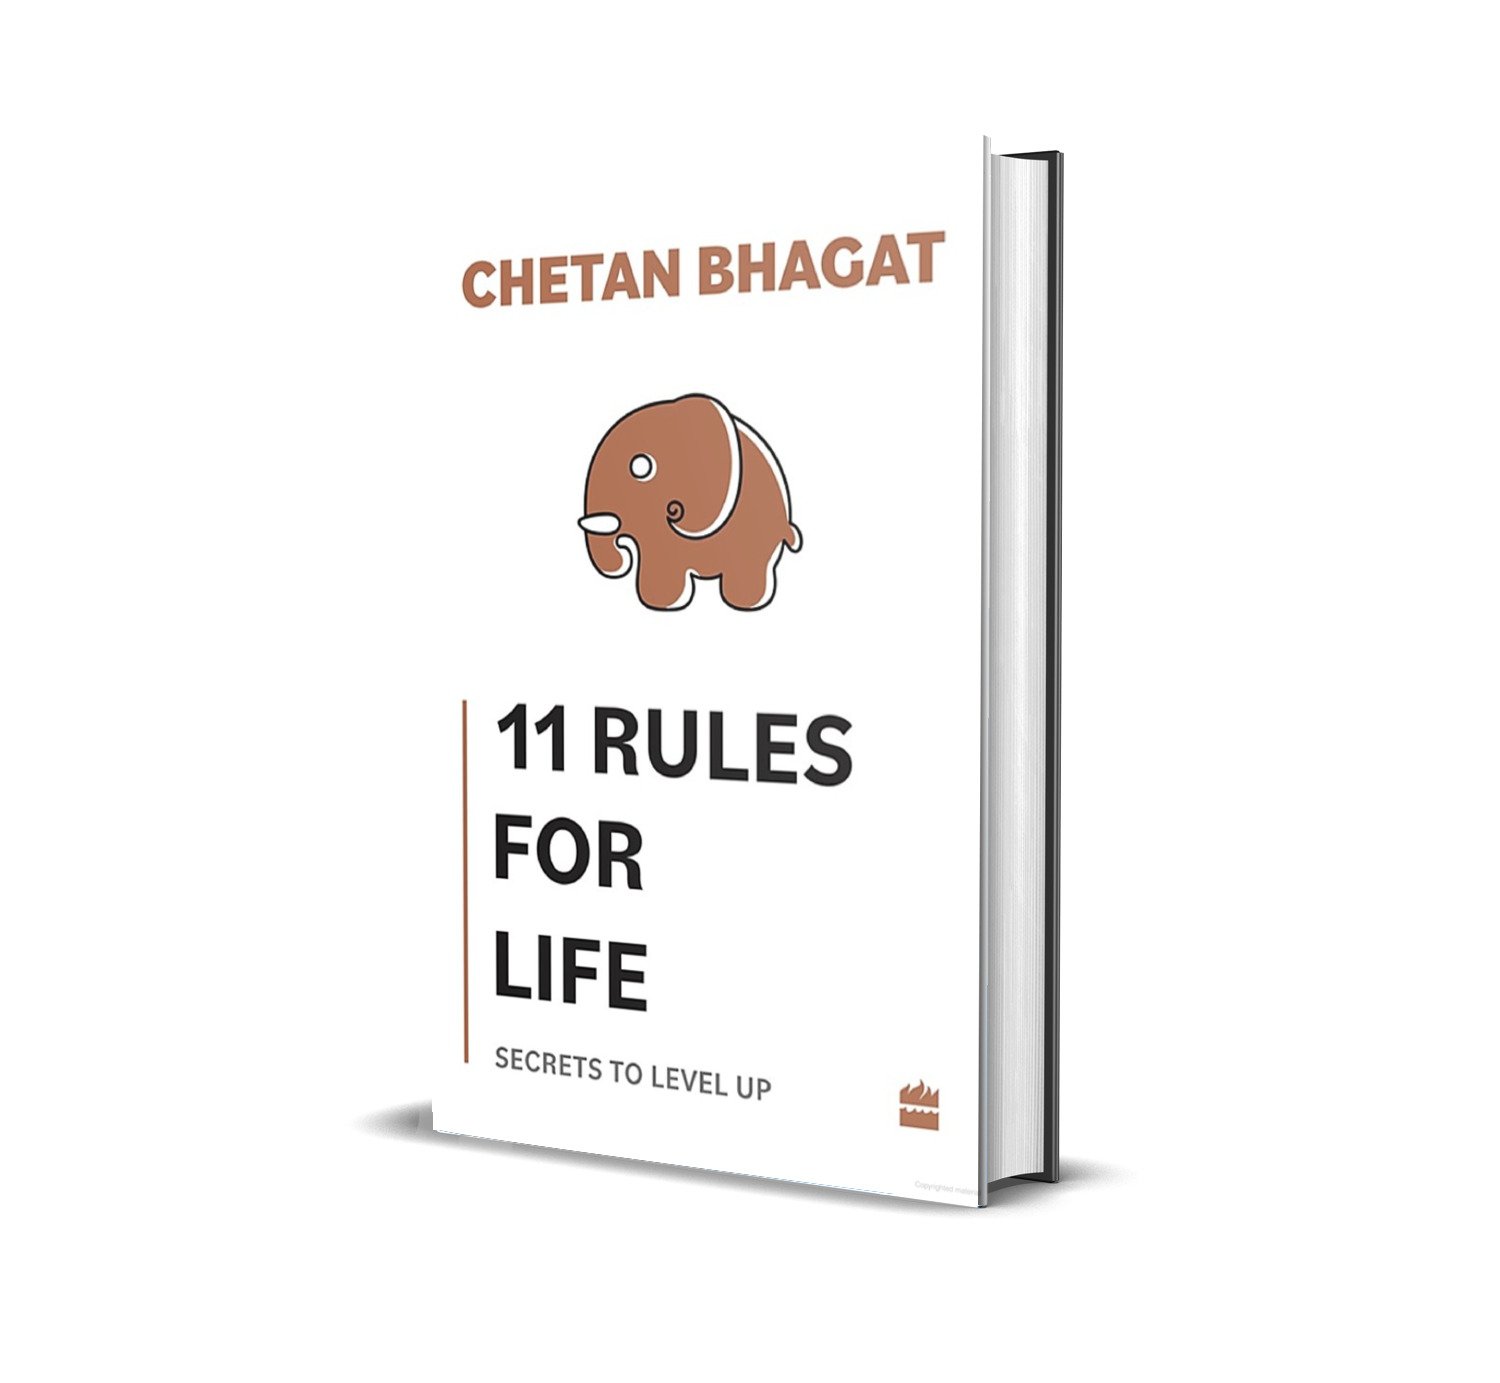 11 Rules For Life: Secrets to Level Up by Chetan Bhagat